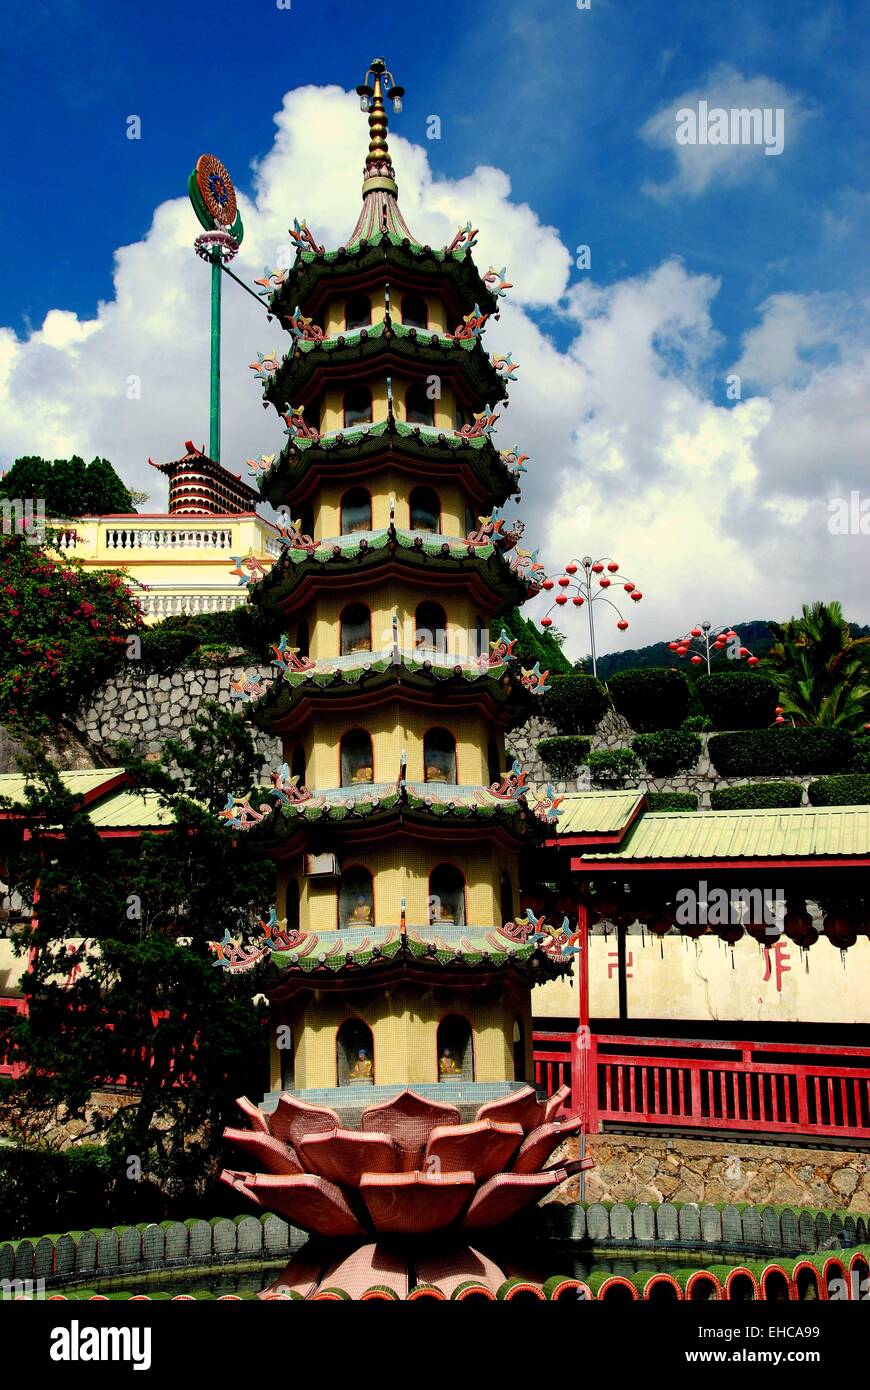 Penang, Malaysia:  The Lotus pagoda with small gold statues of Buddha set in recessed niches at the 1891 Kek Lok Si Temple Stock Photo